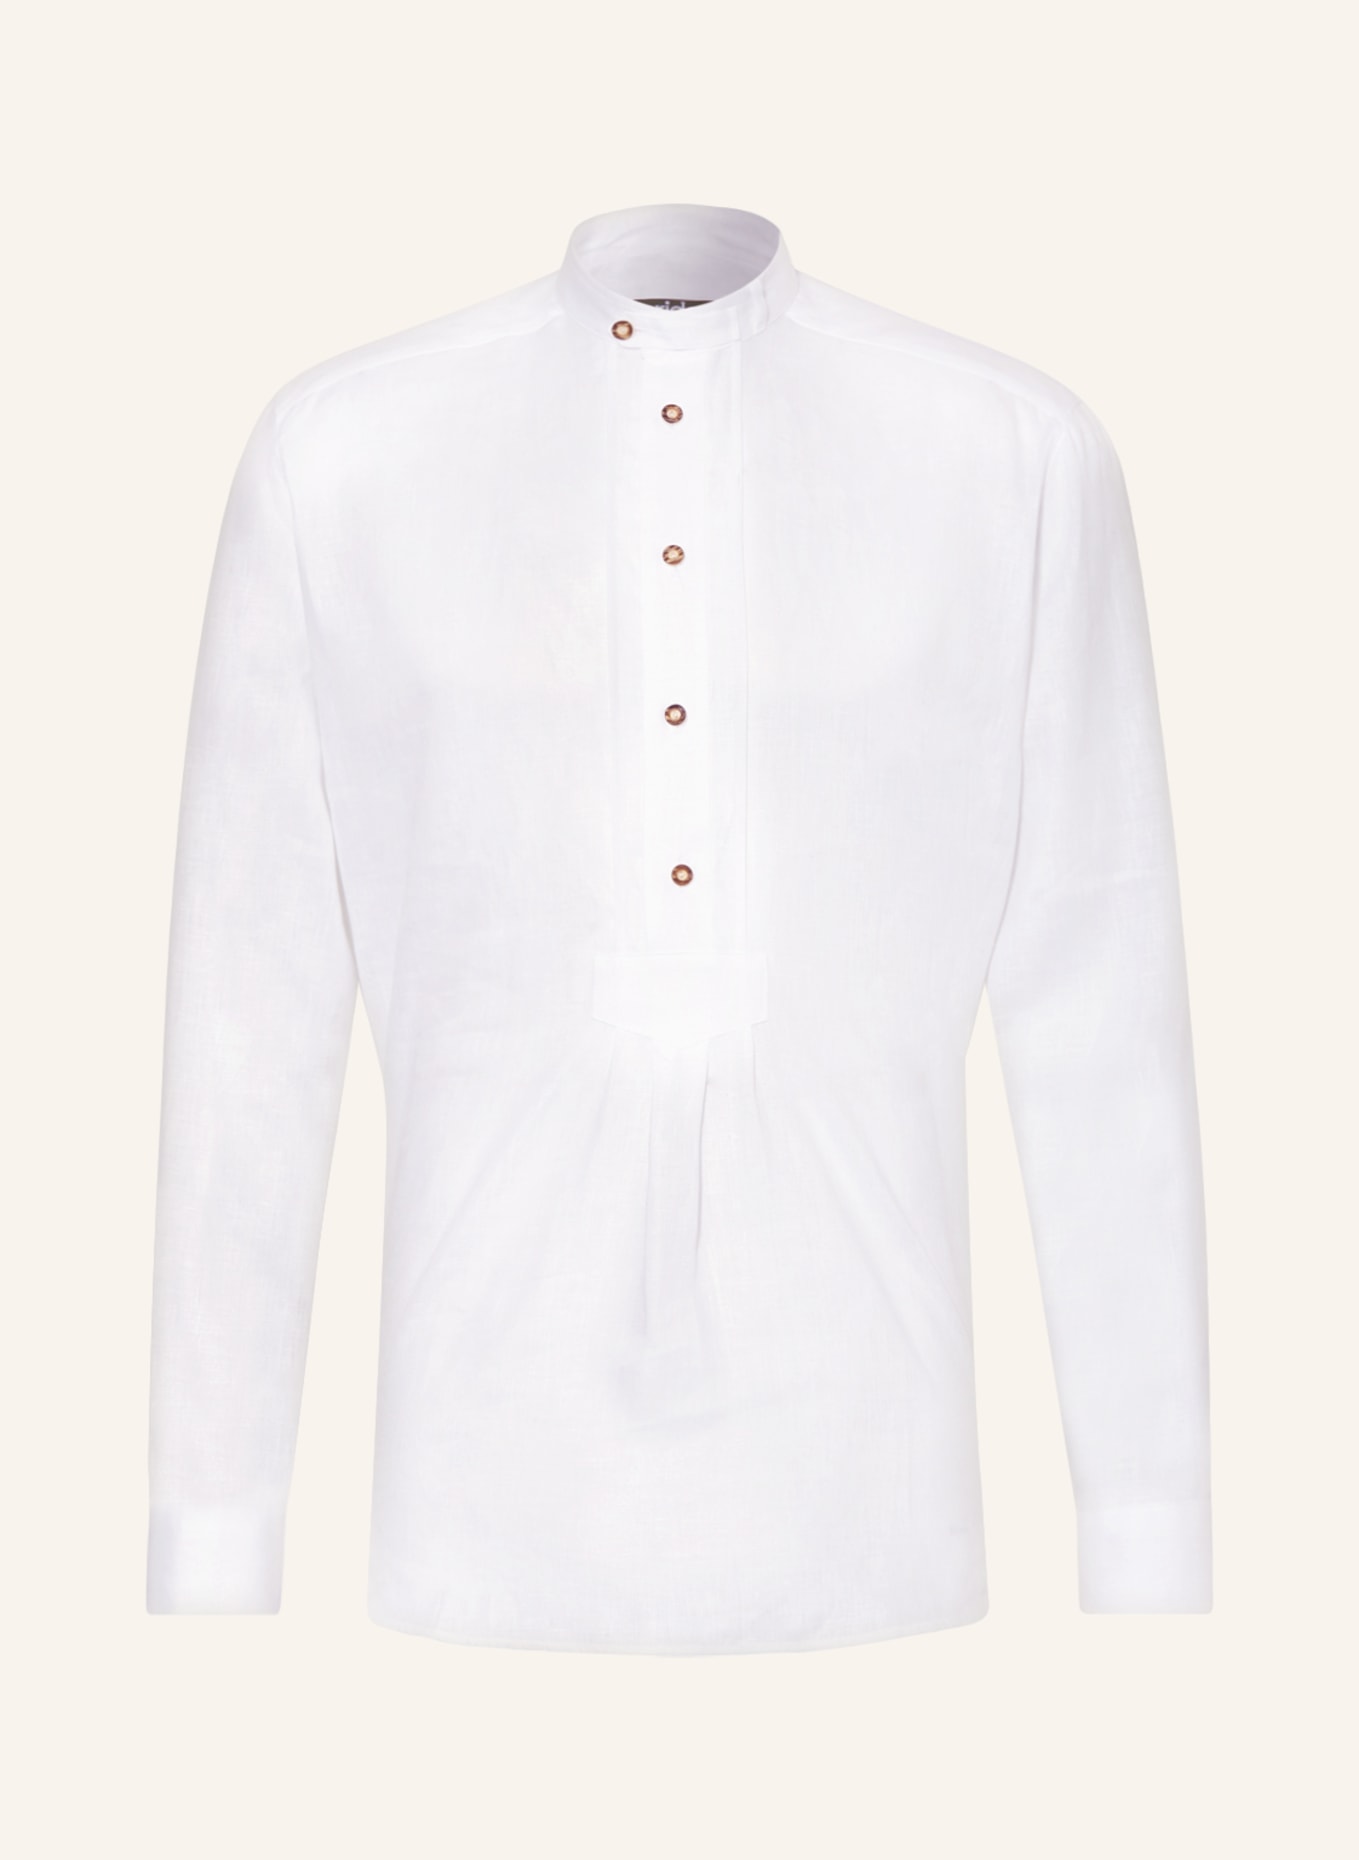 arido Trachten shirt made fit of white stand-up in collar regular with linen